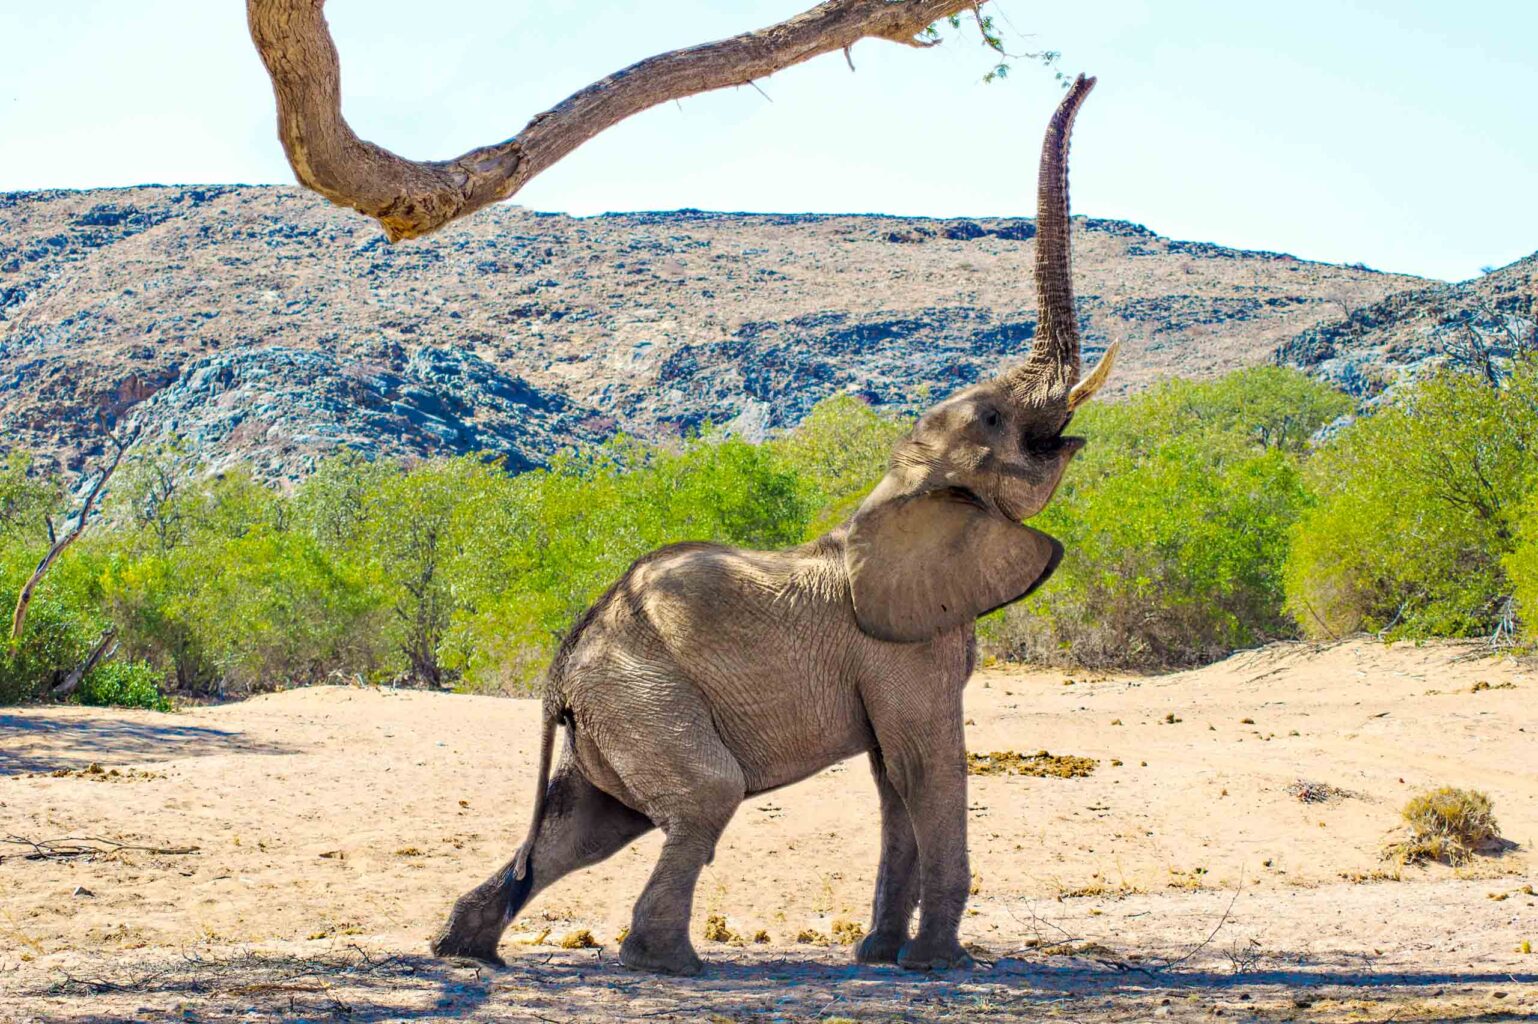 An elephant in Namibia.